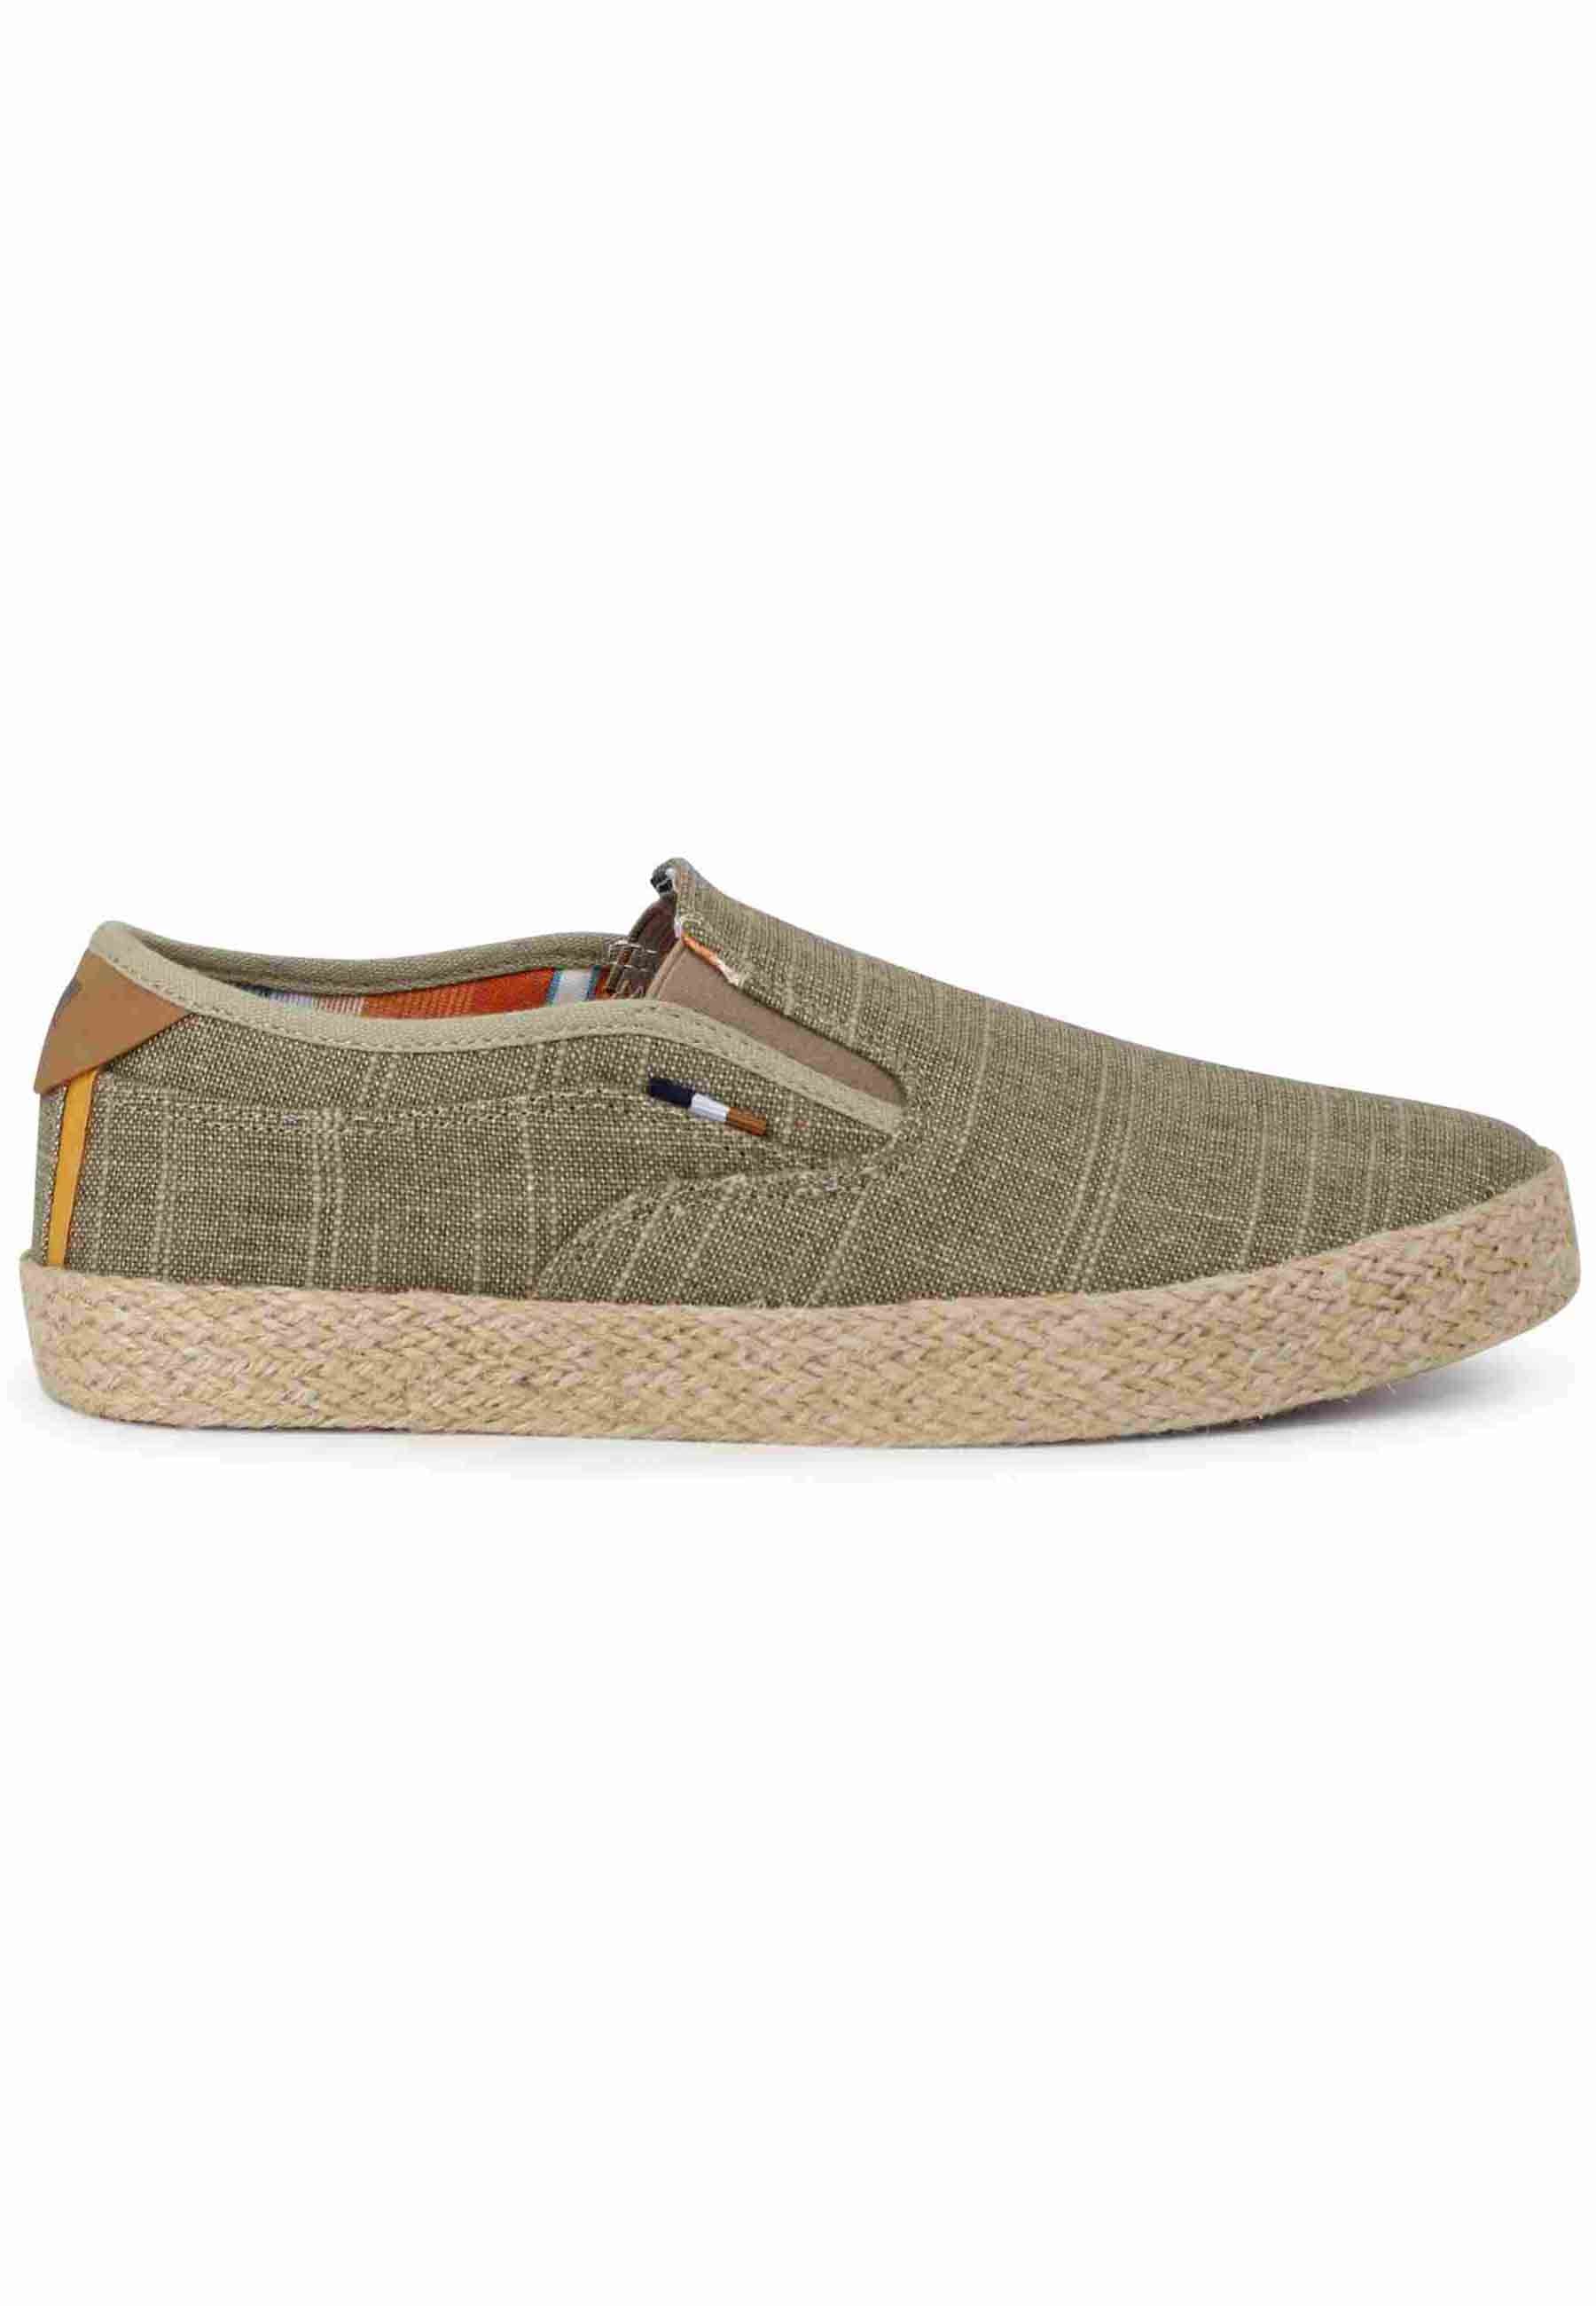 Calypso Slip On Rope men's moccasins in sand fabric with rope sole